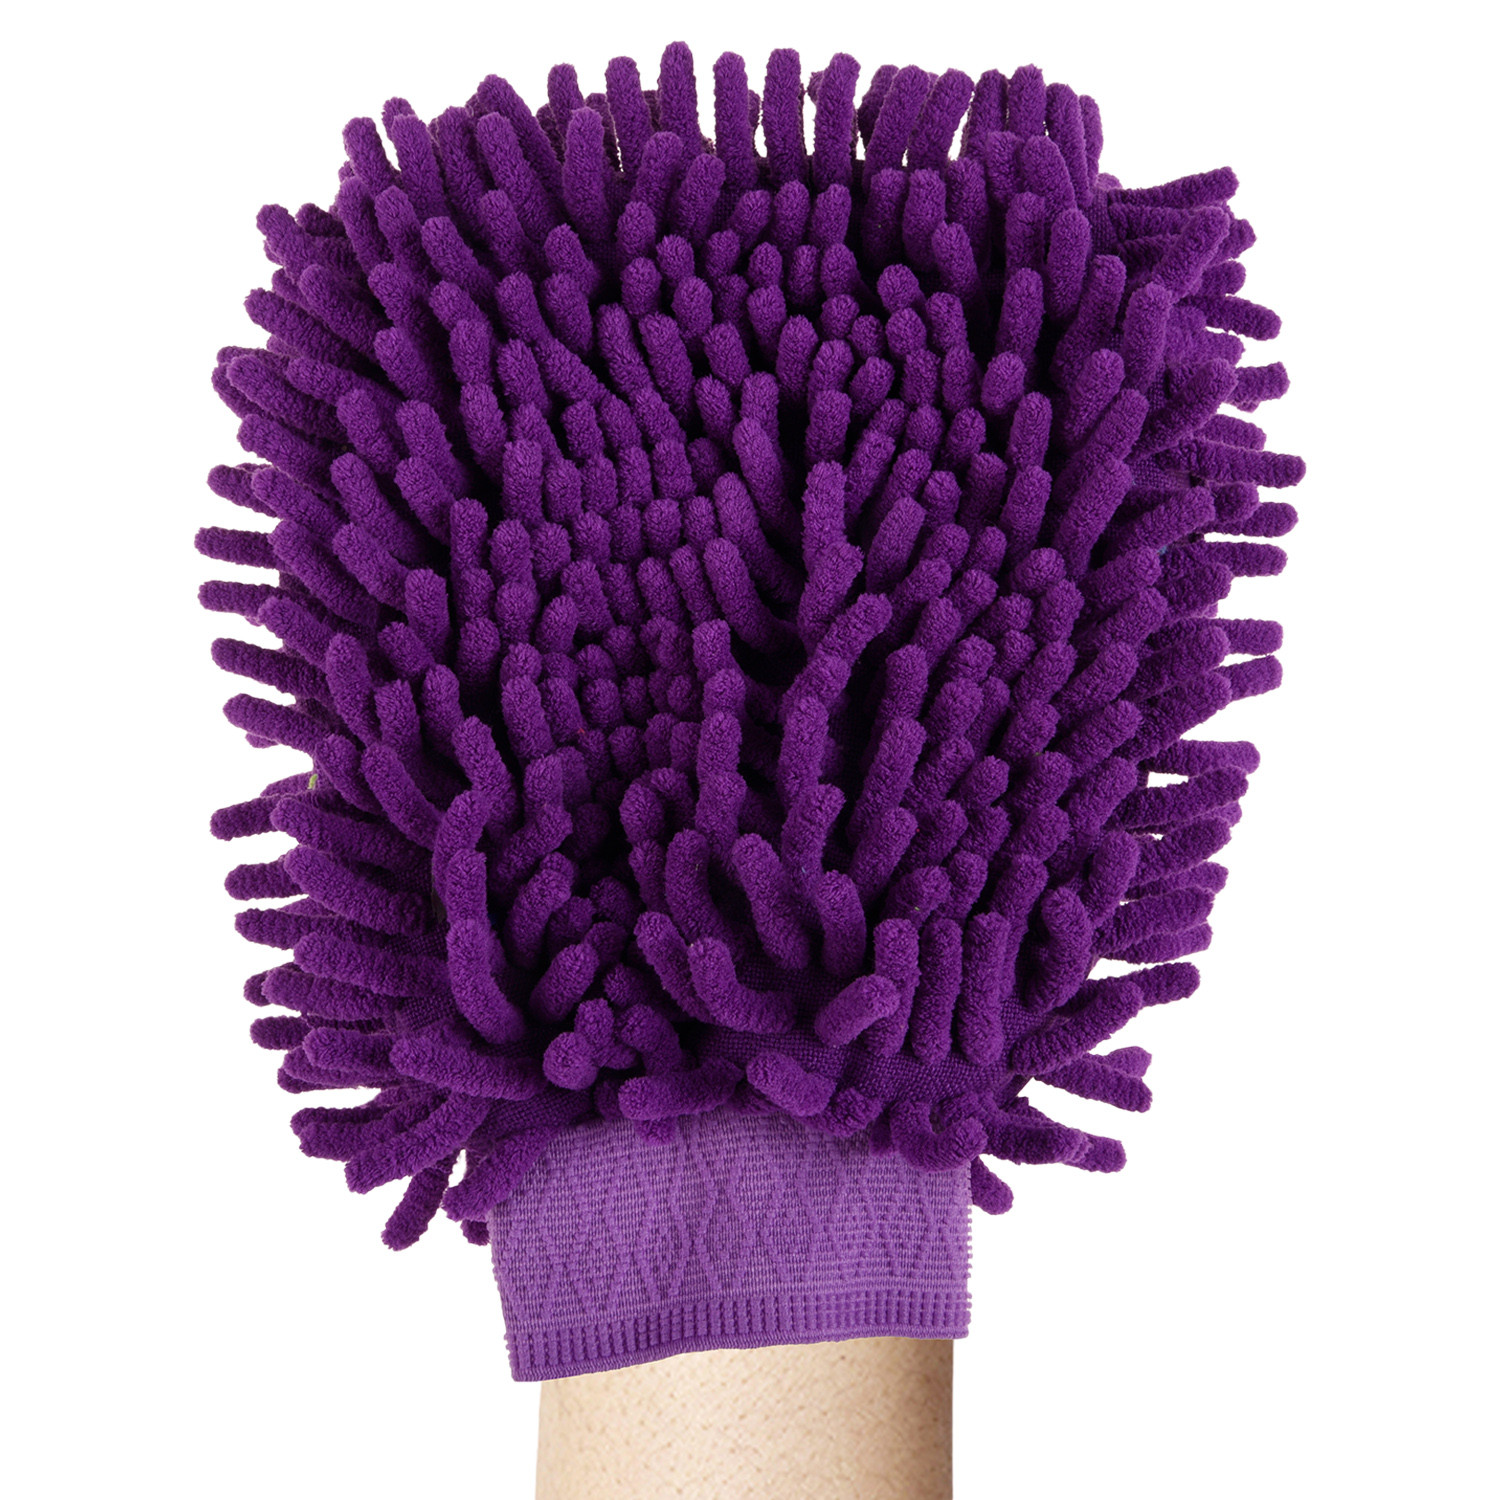 Kuber Industries Chenille Mitts|Microfiber Cleaning Gloves|Inside Waterproof Cloth Gloves|100 Gram Weighted Hand Duster|Chenille Gloves For Car|Glass|Pack of 2 (Purple & Red)